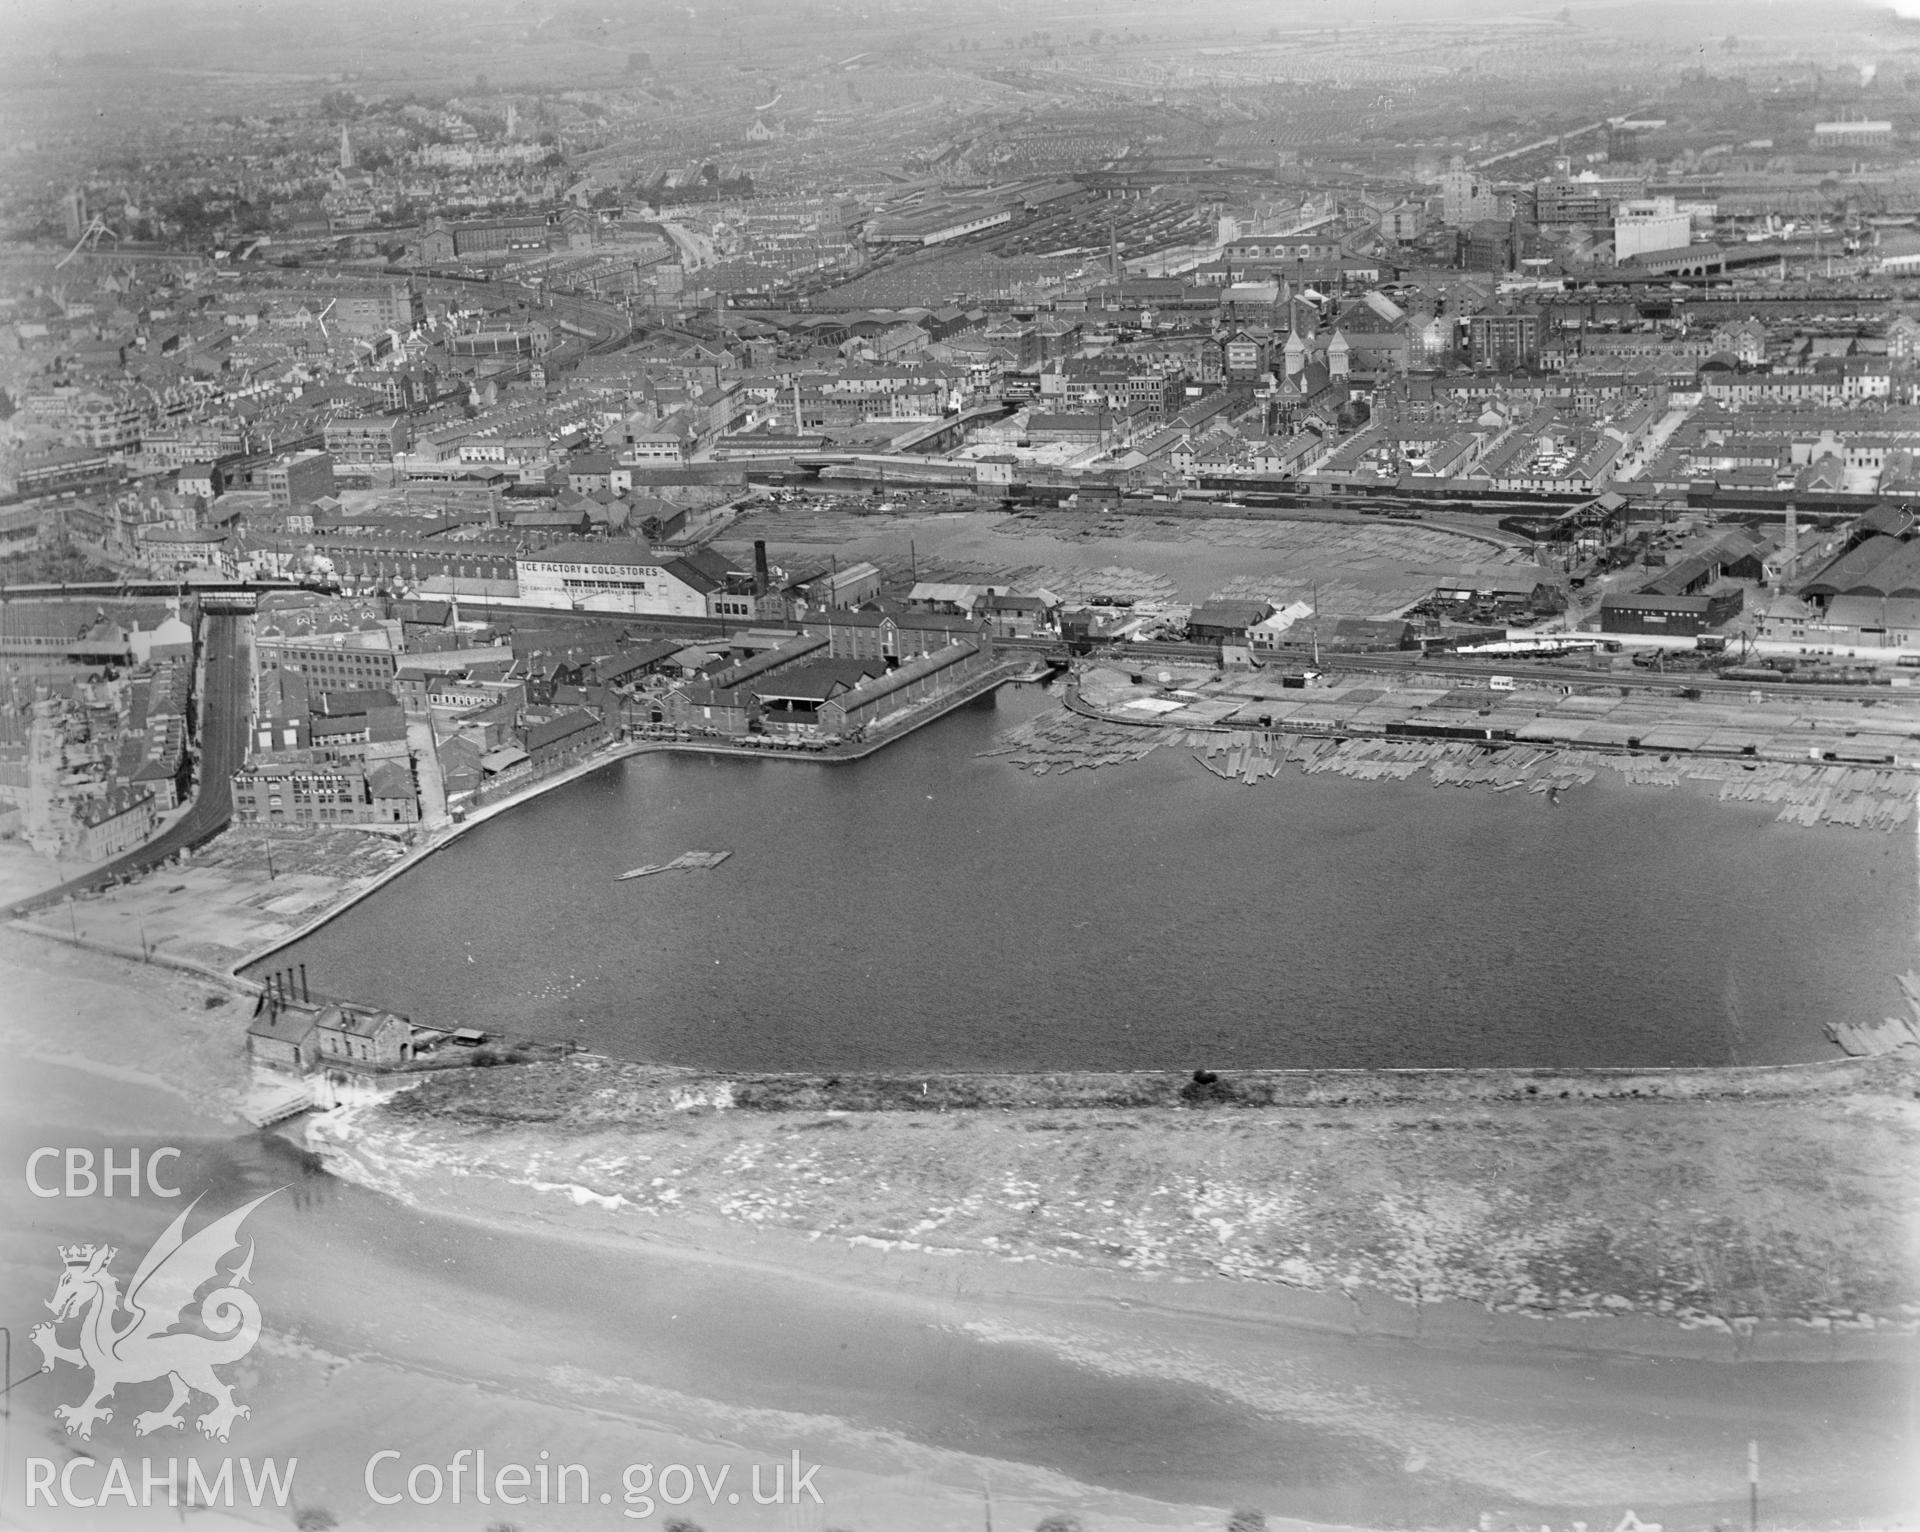 View of Cardiff showing timber ponds in Butetown, includes Welsh Hills lemonade works and the Cardiff Pure Ice and storage factory, oblique aerial view. 5?x4? black and white glass plate negative.